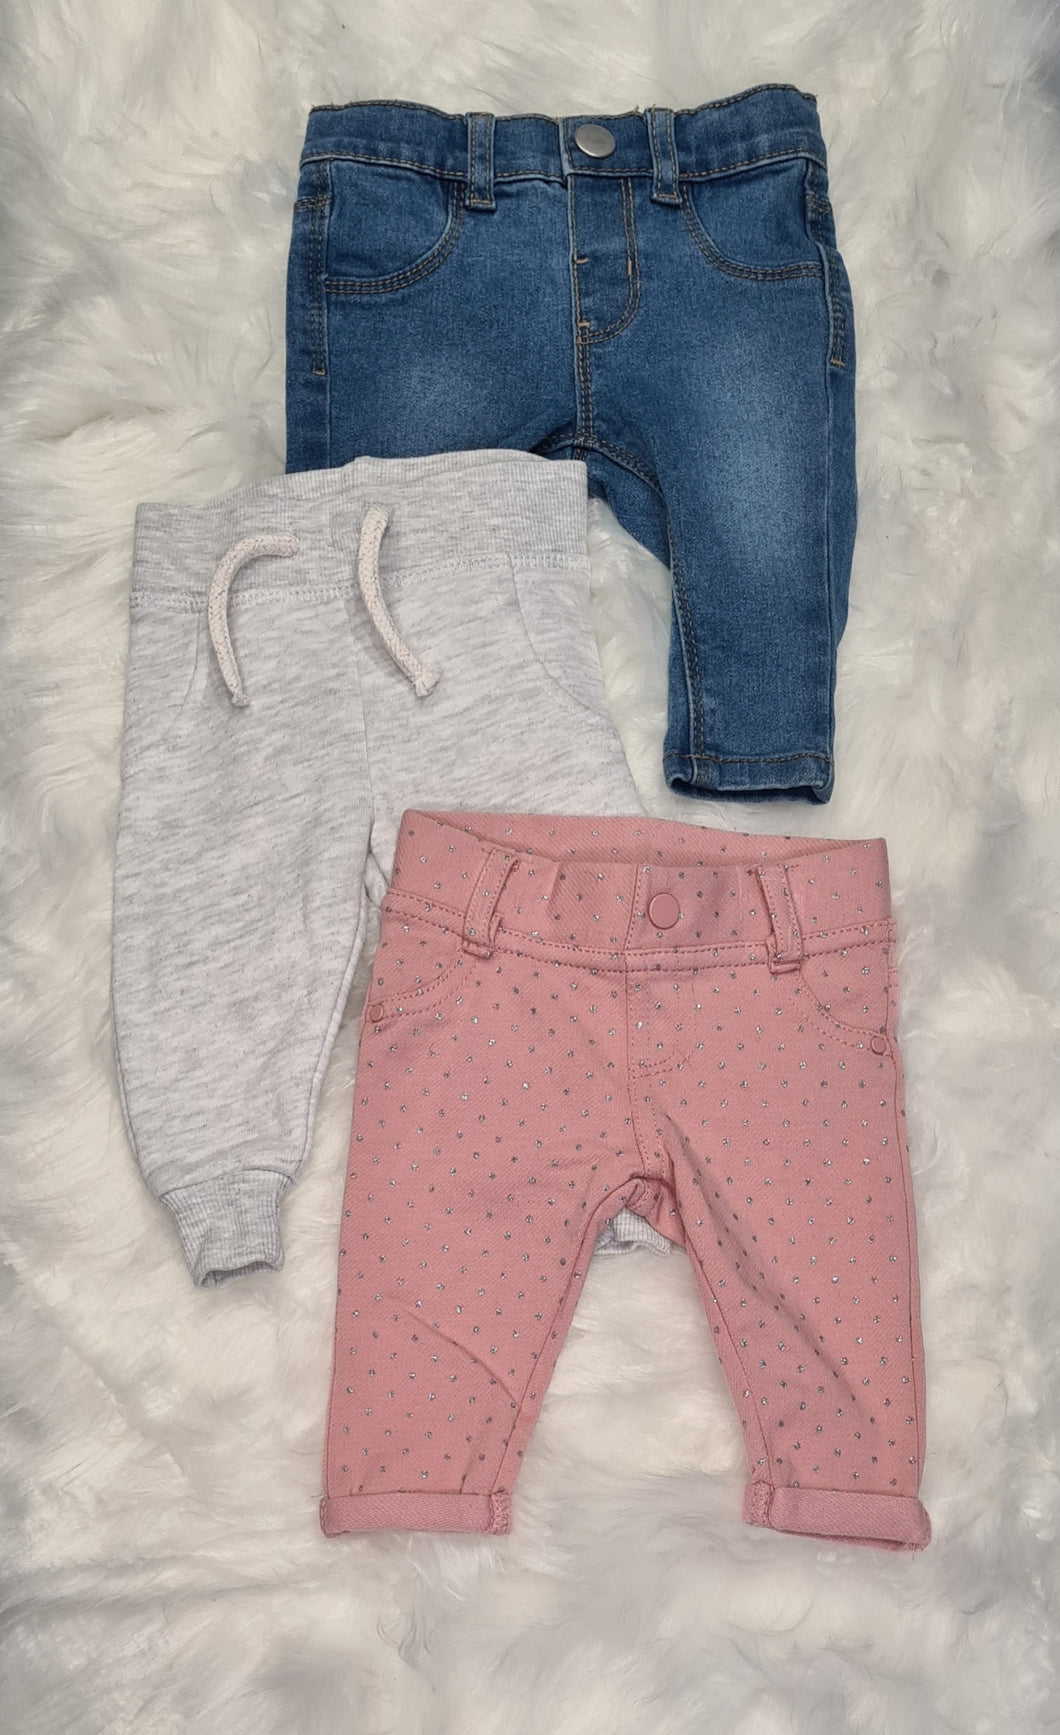 Girls 0-3 Months - Primark - Set of 3 Jeans -Trouser - Joggers